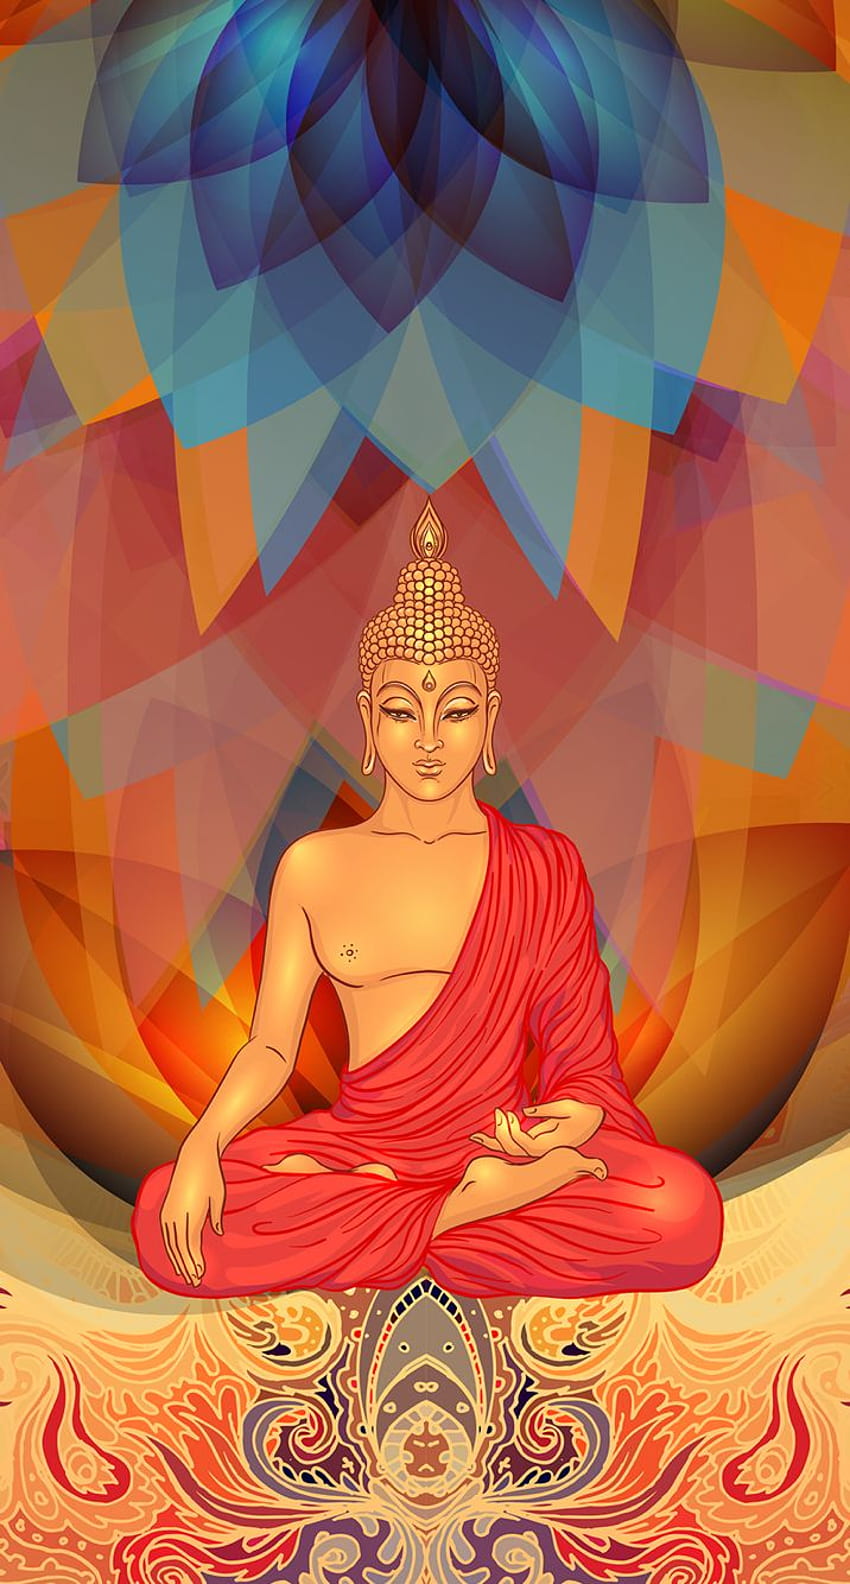 Buddha art Images - Search Images on Everypixel